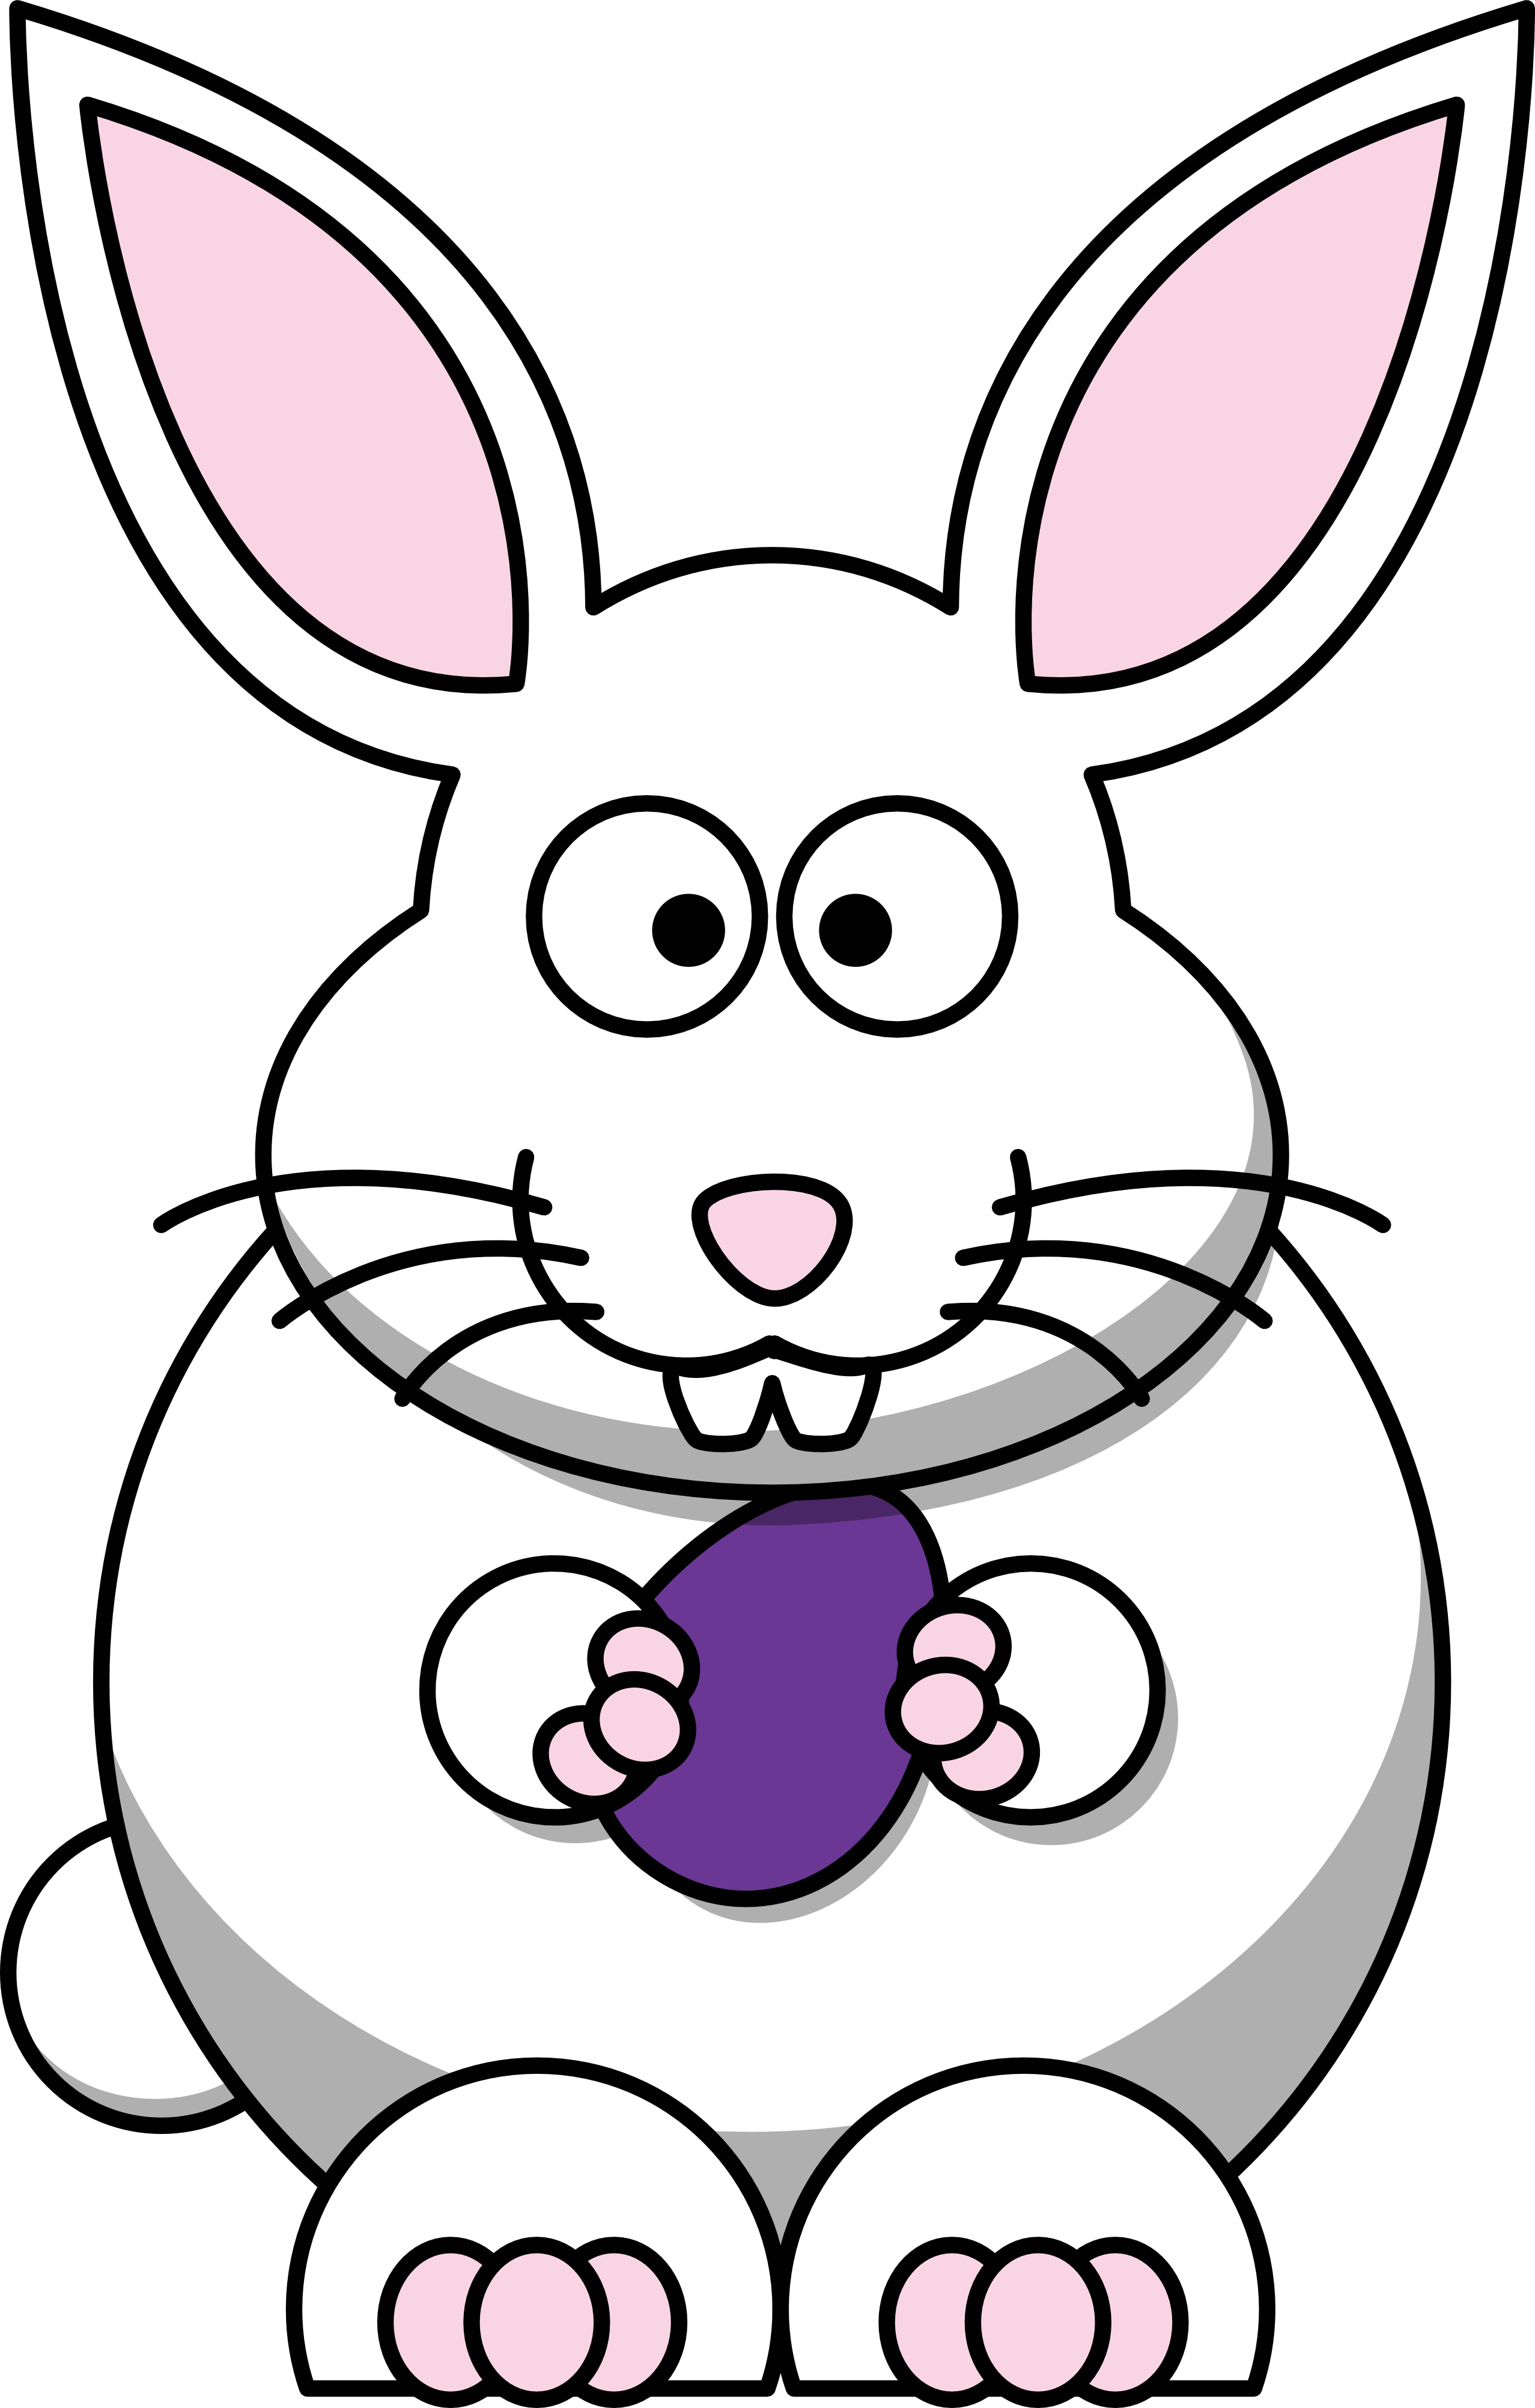 Images For > Cute Cartoon Rabbit Drawing